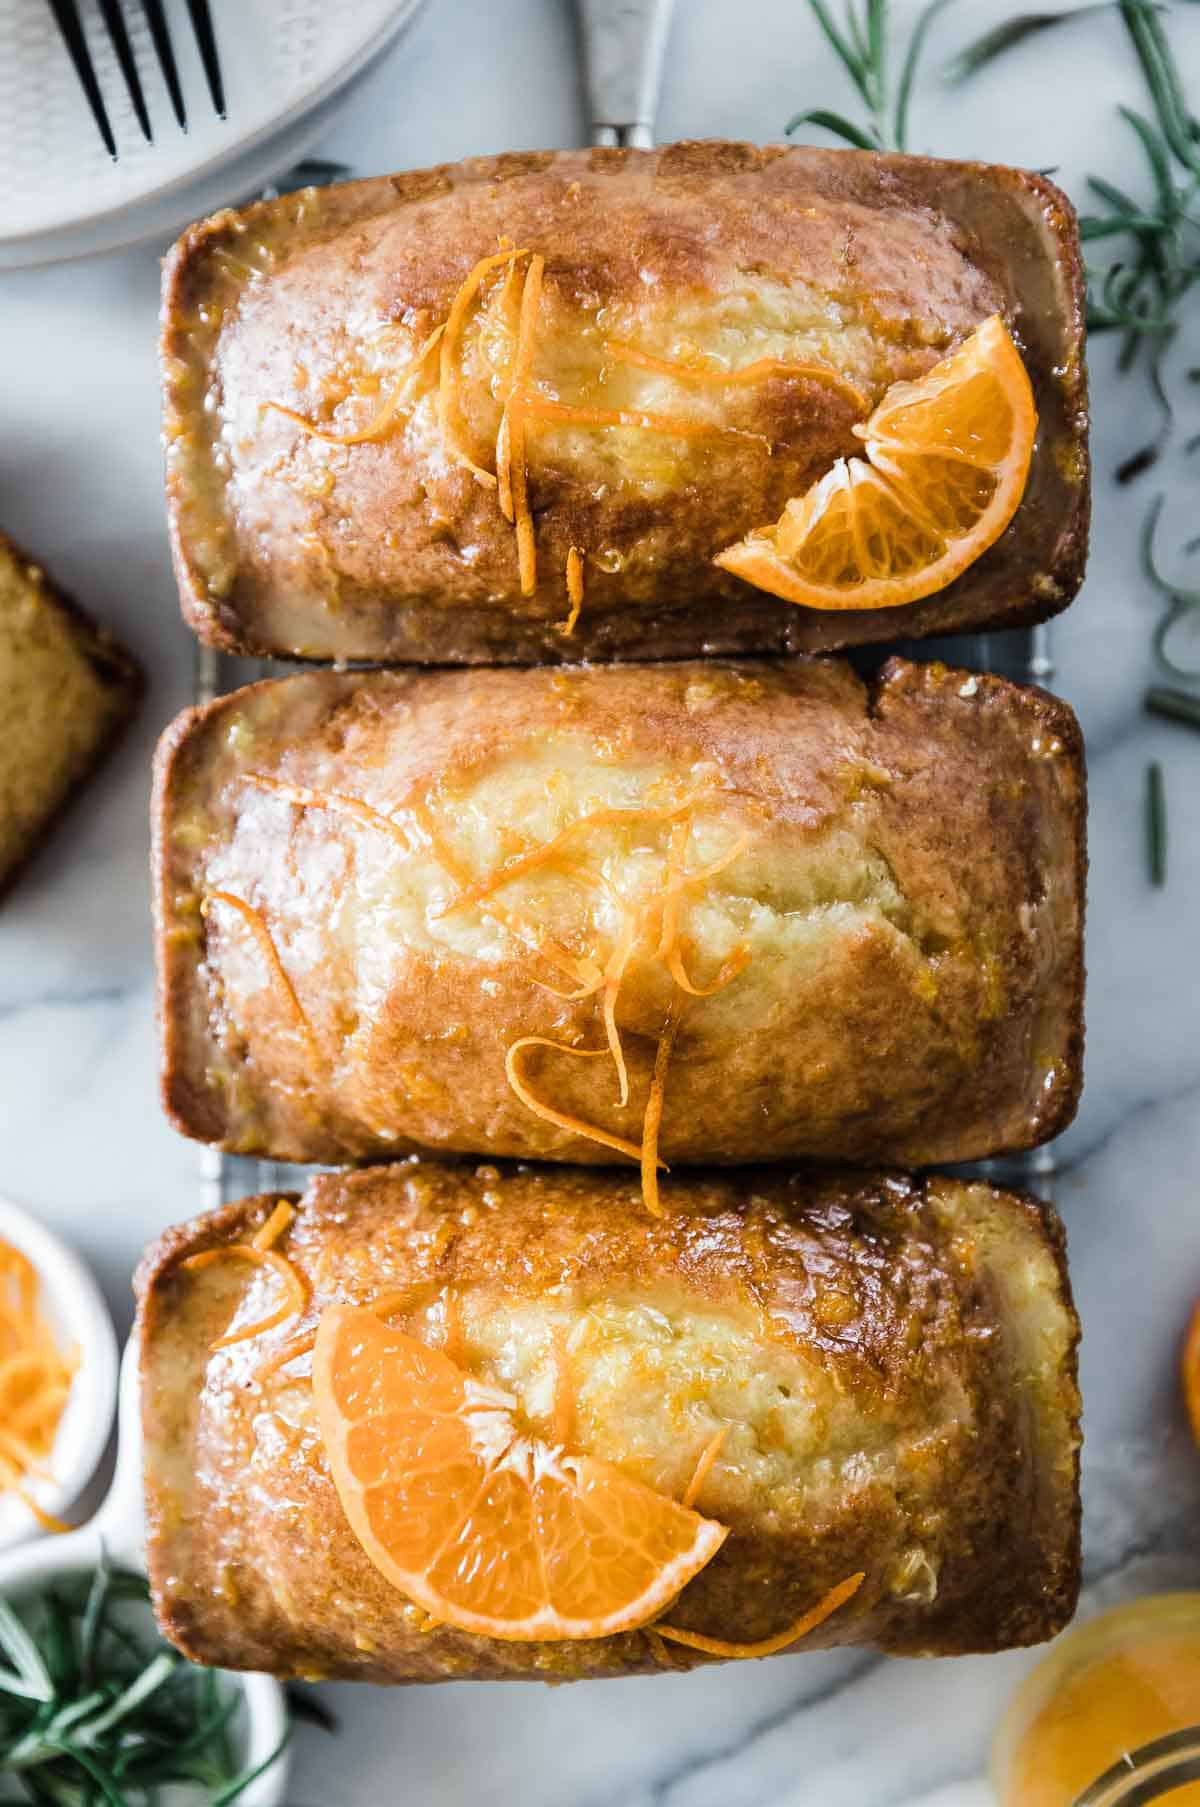 Three loaves of orange bread on a wire cooling rack. They are garnished with orange zest.